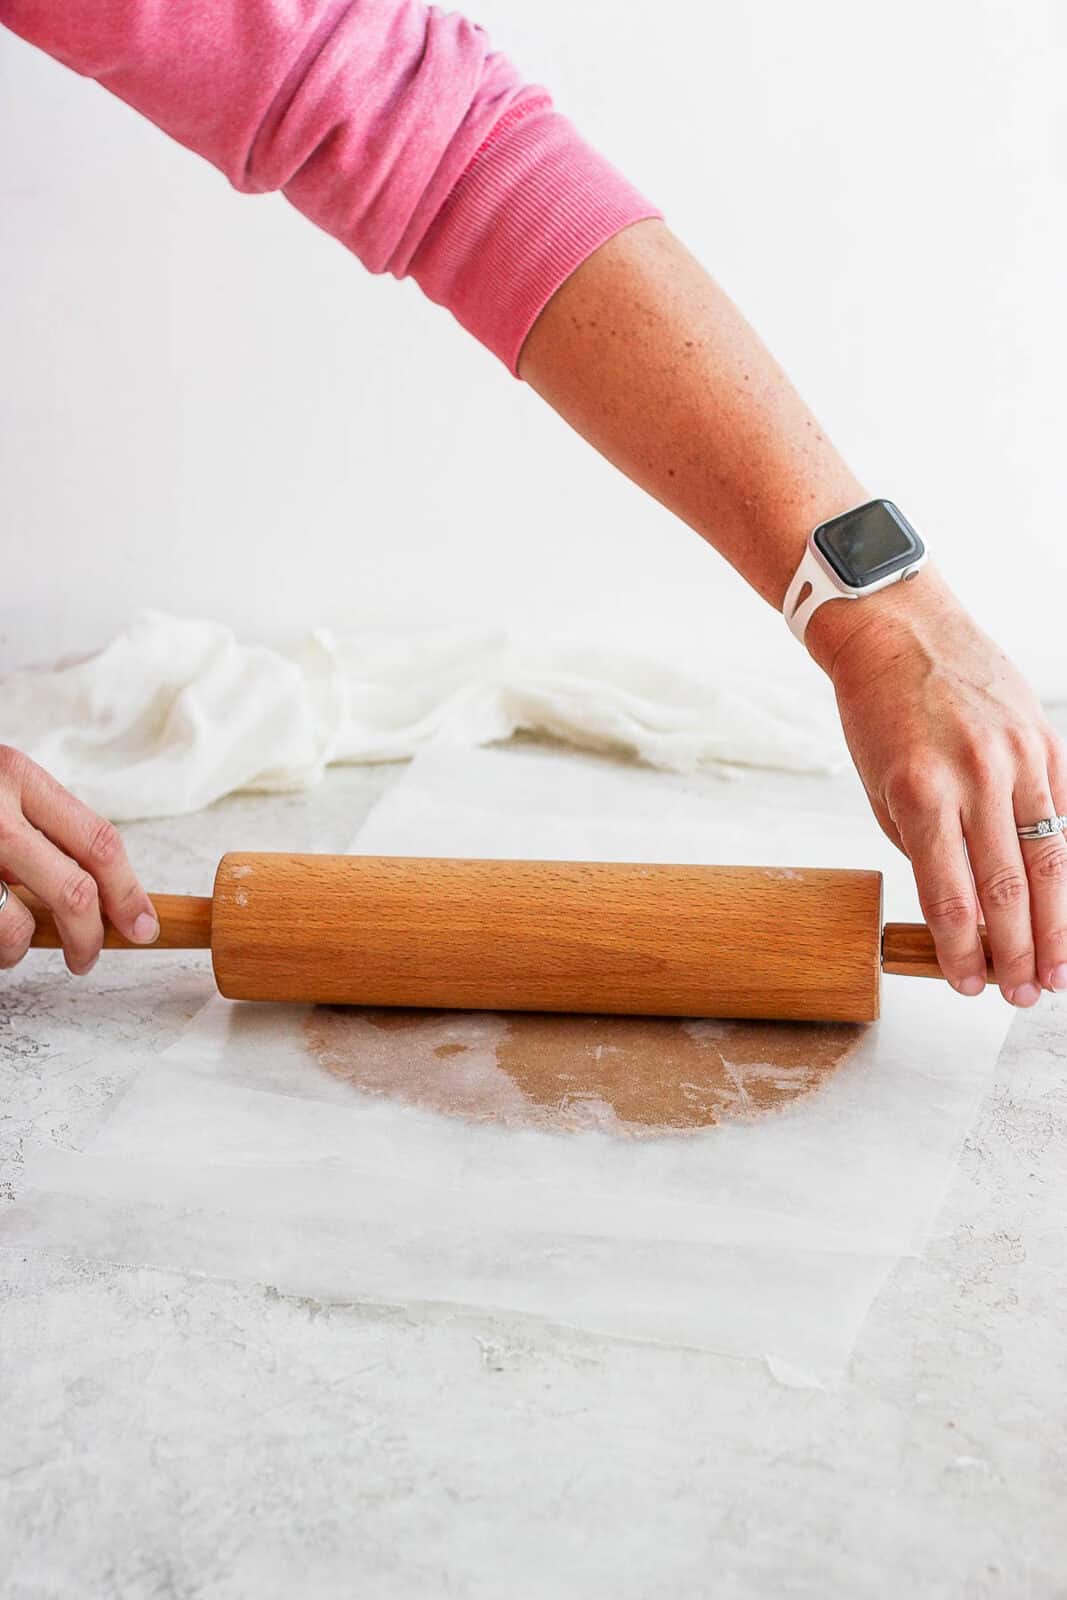 Almond flour cookie dough being rolled out by a rolling pin.